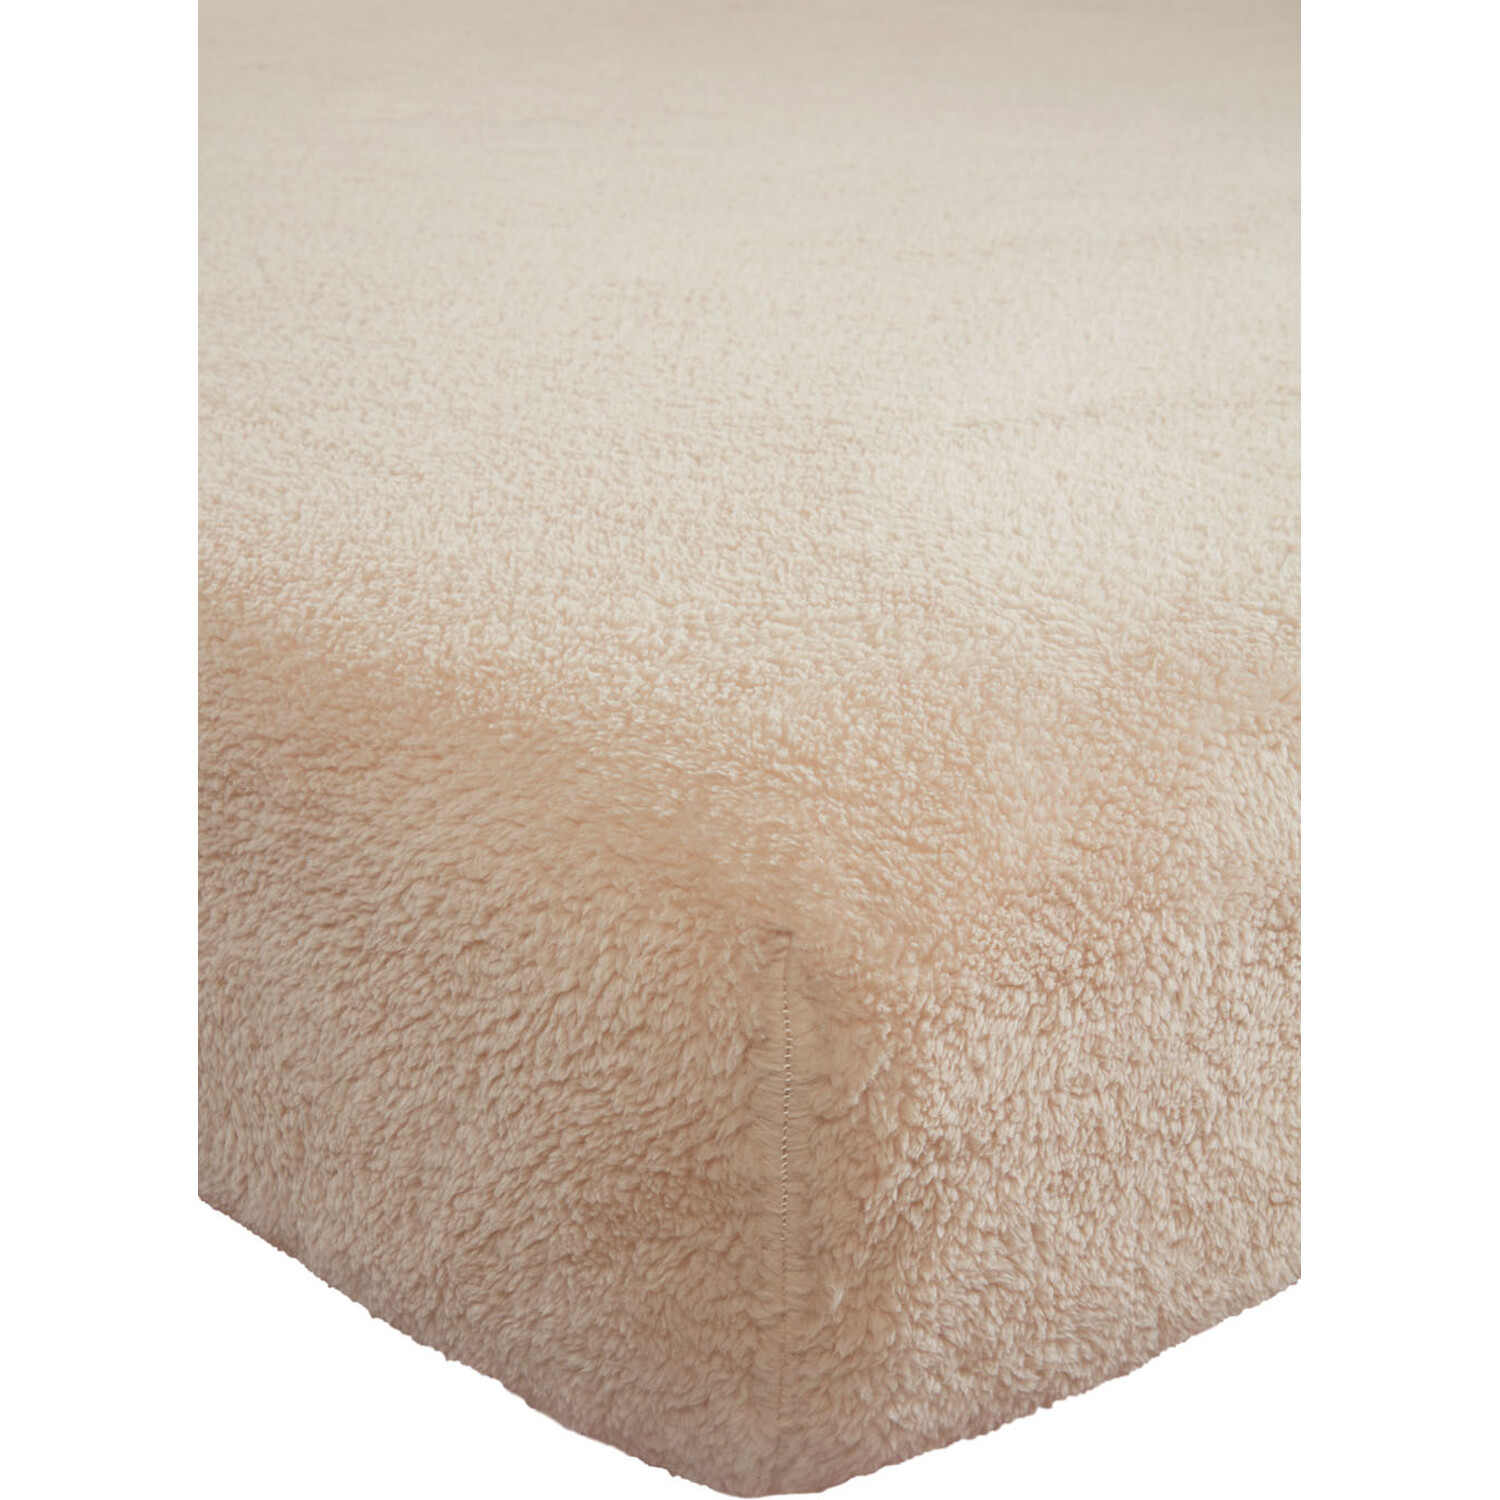 Single Natural Teddy Fleece Fitted Bed Sheet Image 1